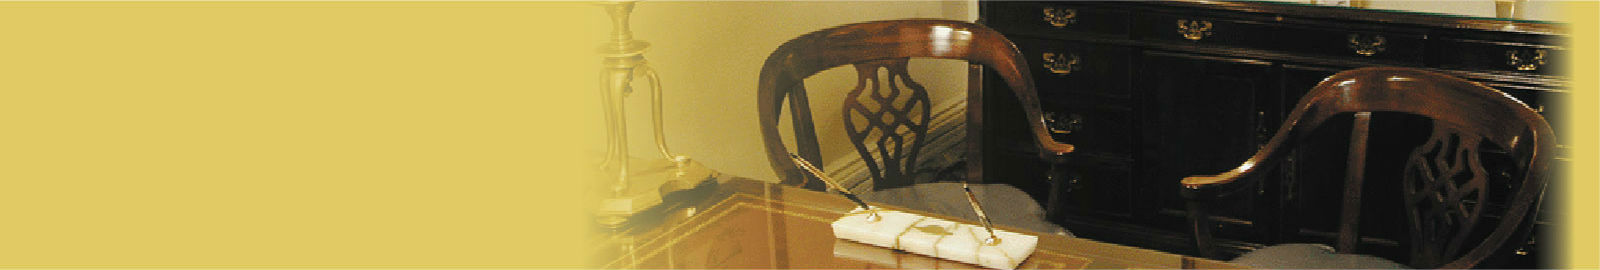 Cremation Services Photo of Desk